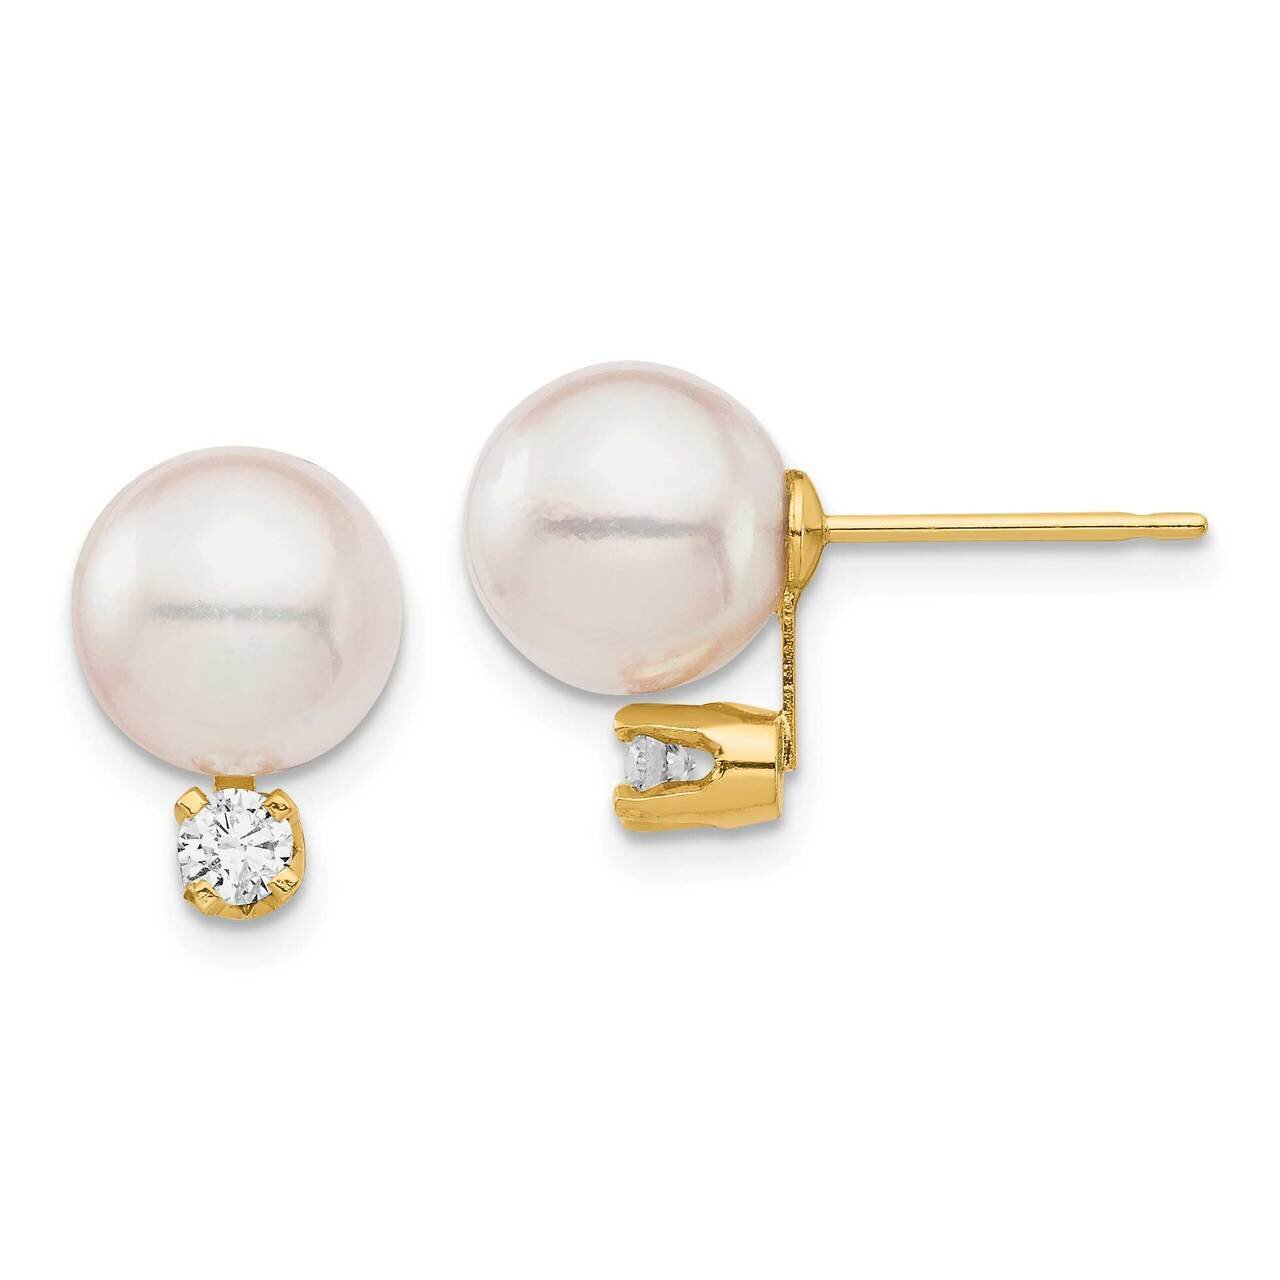 8-9mm White Round Saltwater Akoya Cultured Pearl Diamond Post Earrings 14k Gold XF682E